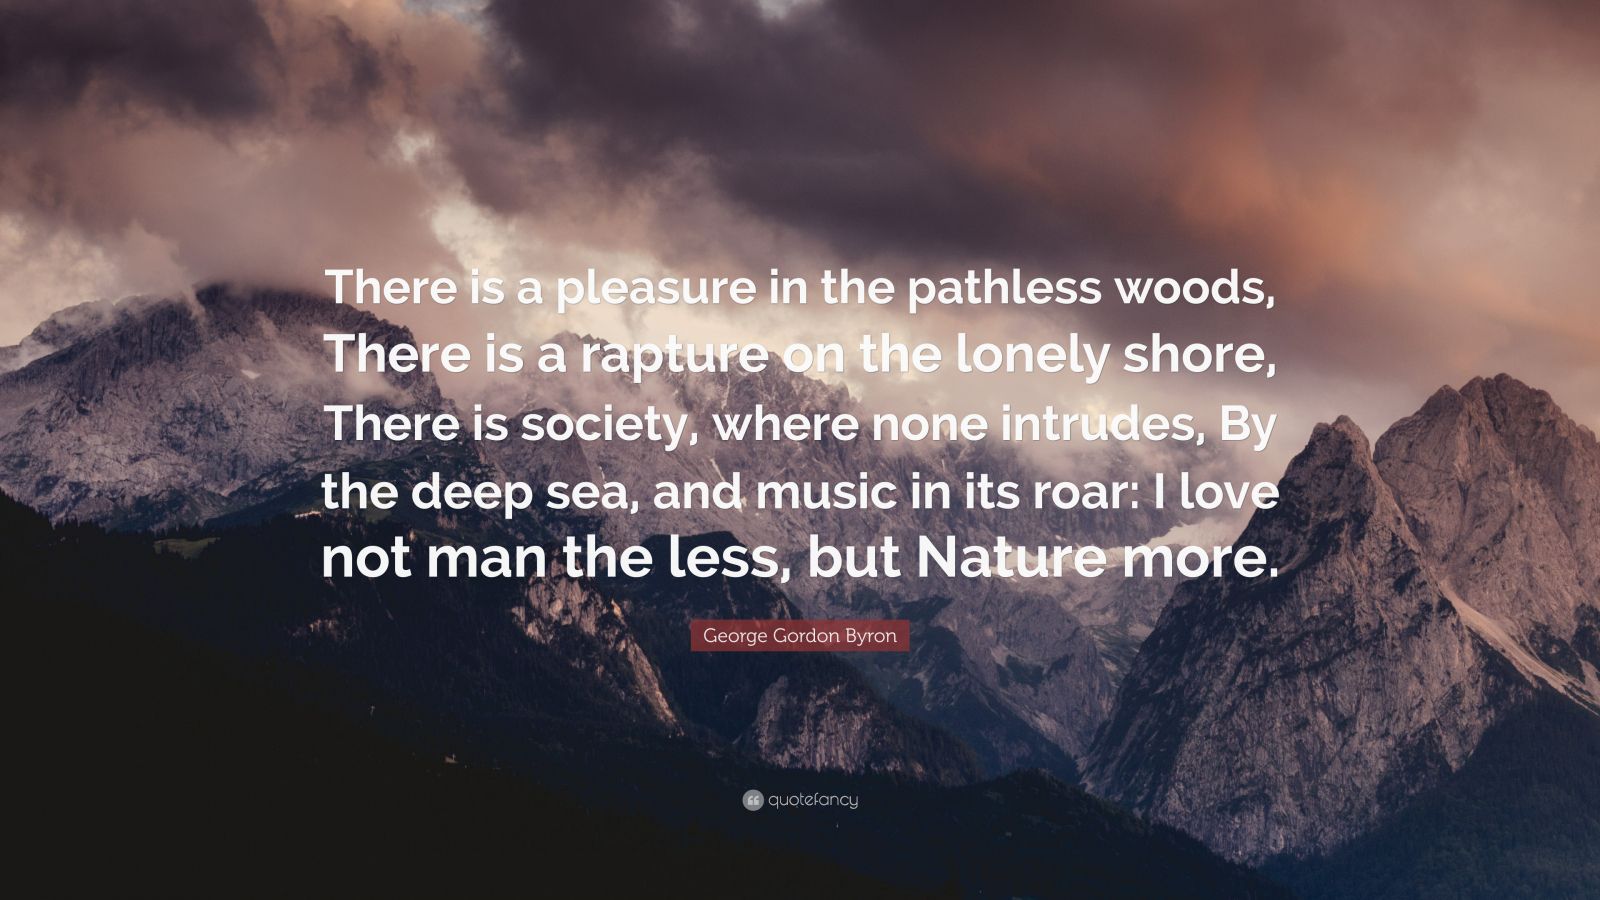 there is a pleasure in the pathless woods meaning